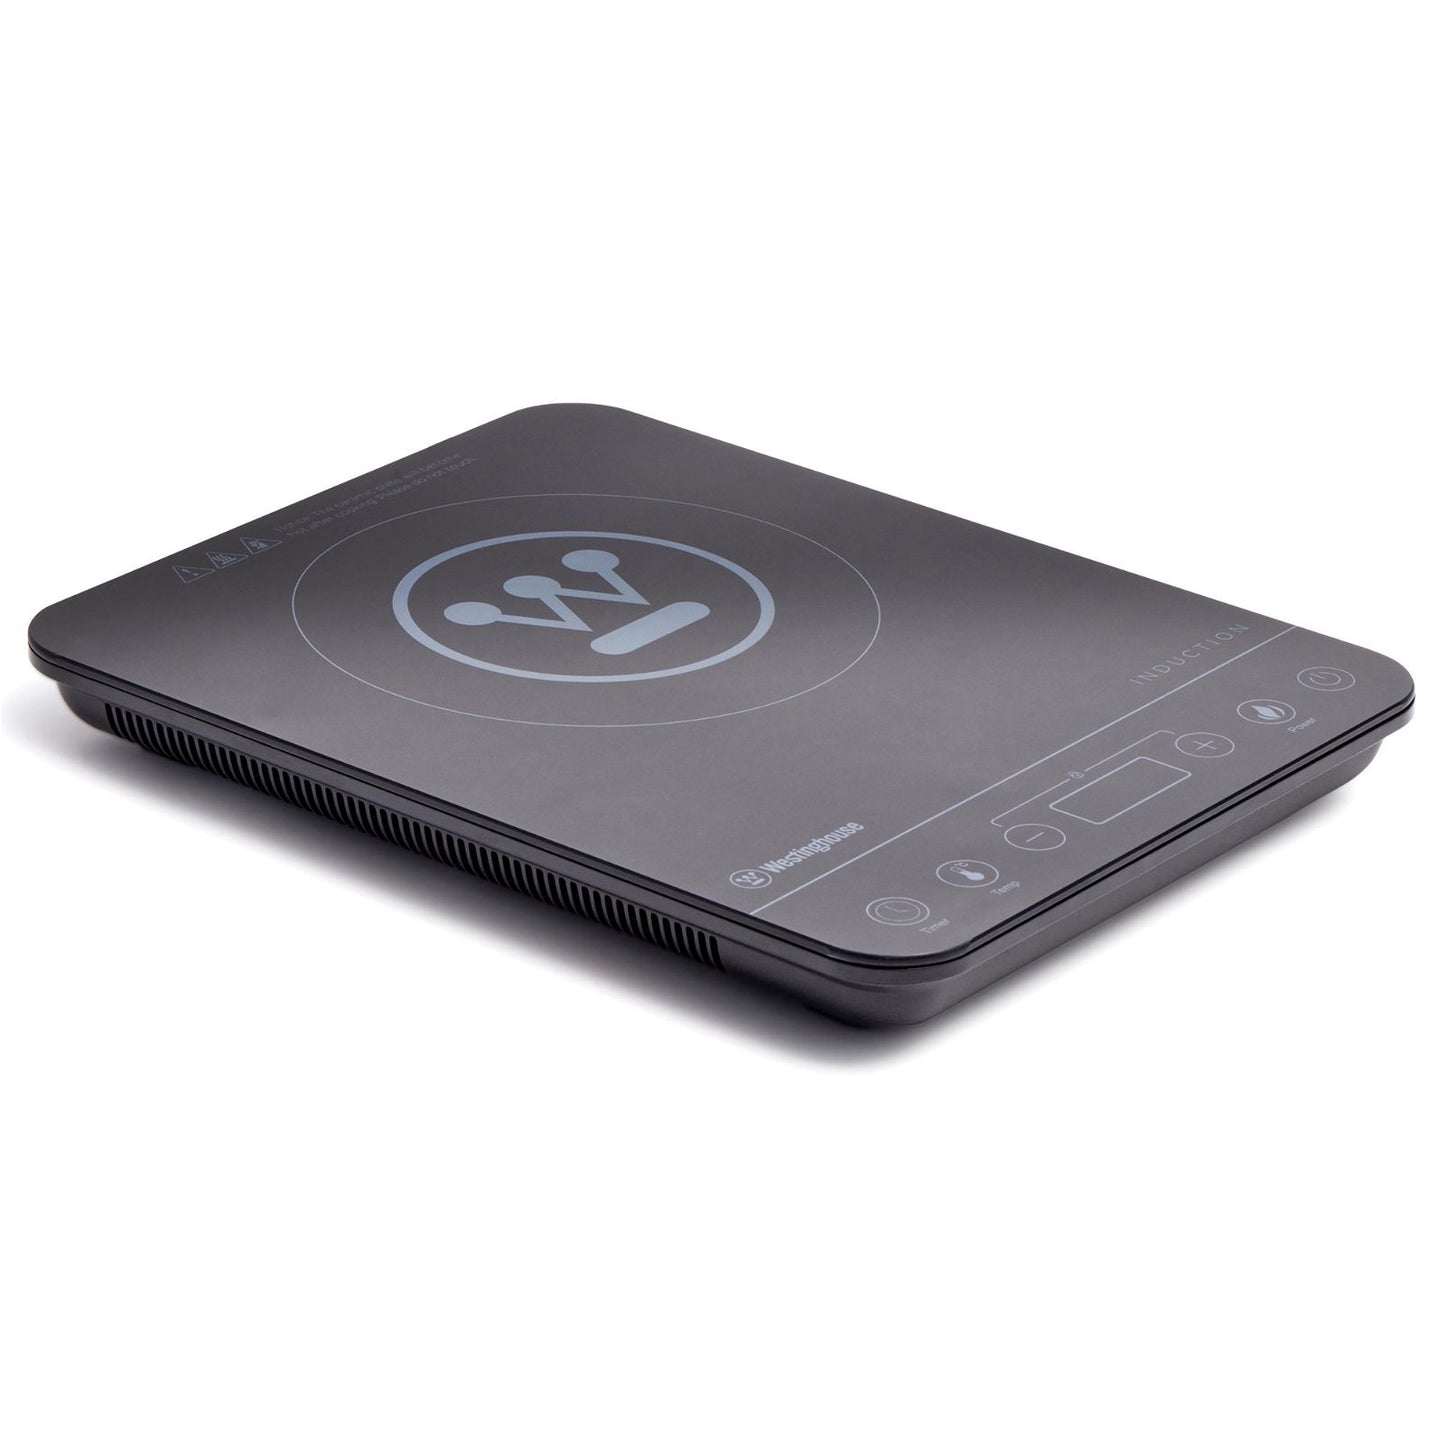 Westinghouse Induction Cooktop 2000W Single-#product_category#- Distributed by:  under license